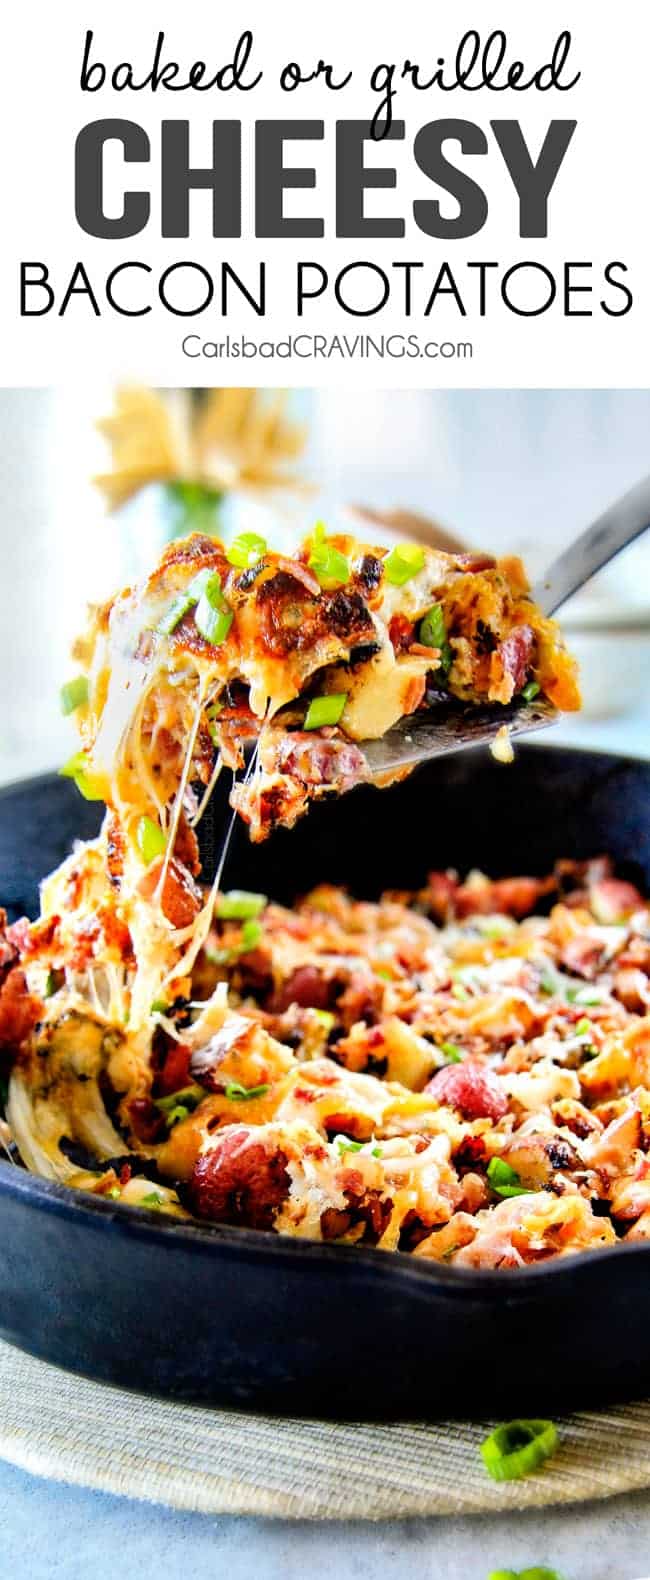 These EASY Baked or Grilled Cheesy Potatoes with Bacon are so ADDICTING!  they are perfectly spiced, ssooooo cheesy and I love the soft centers and crispy edges!  Tastes like potato skins but better!